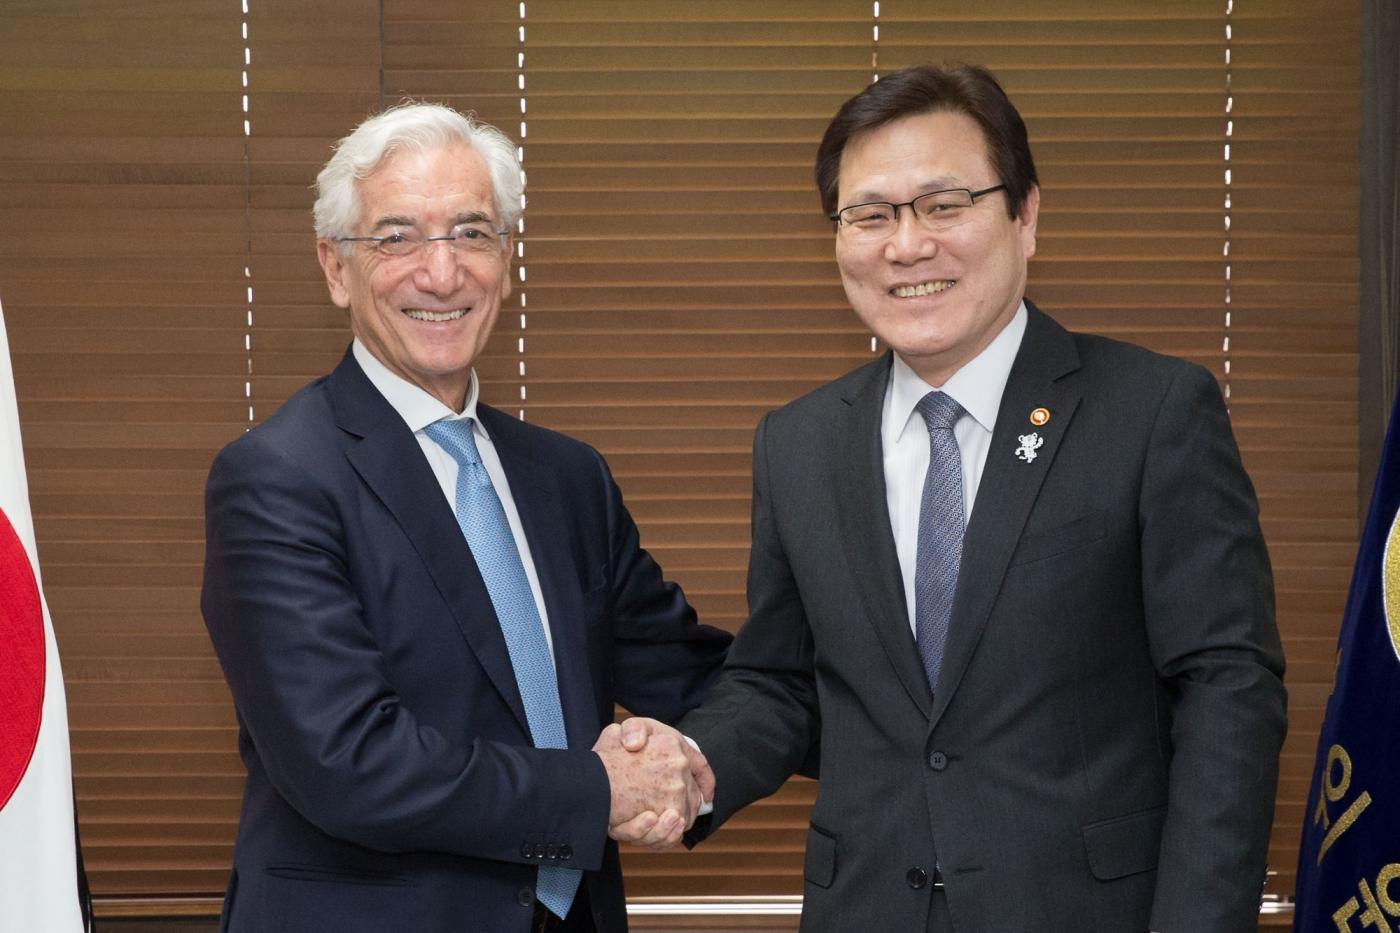 Seoul: Financial Services Commission (FSC) Chairman Choi Jong-ku (R) shakes hands with Ronald Cohen, chairman of the Global Social Impact Investment Steering Group (GSG), during their meeting in Seoul on Feb. 22, 2018, in this photo provided by the FSC.(Yonhap/IANS) by .